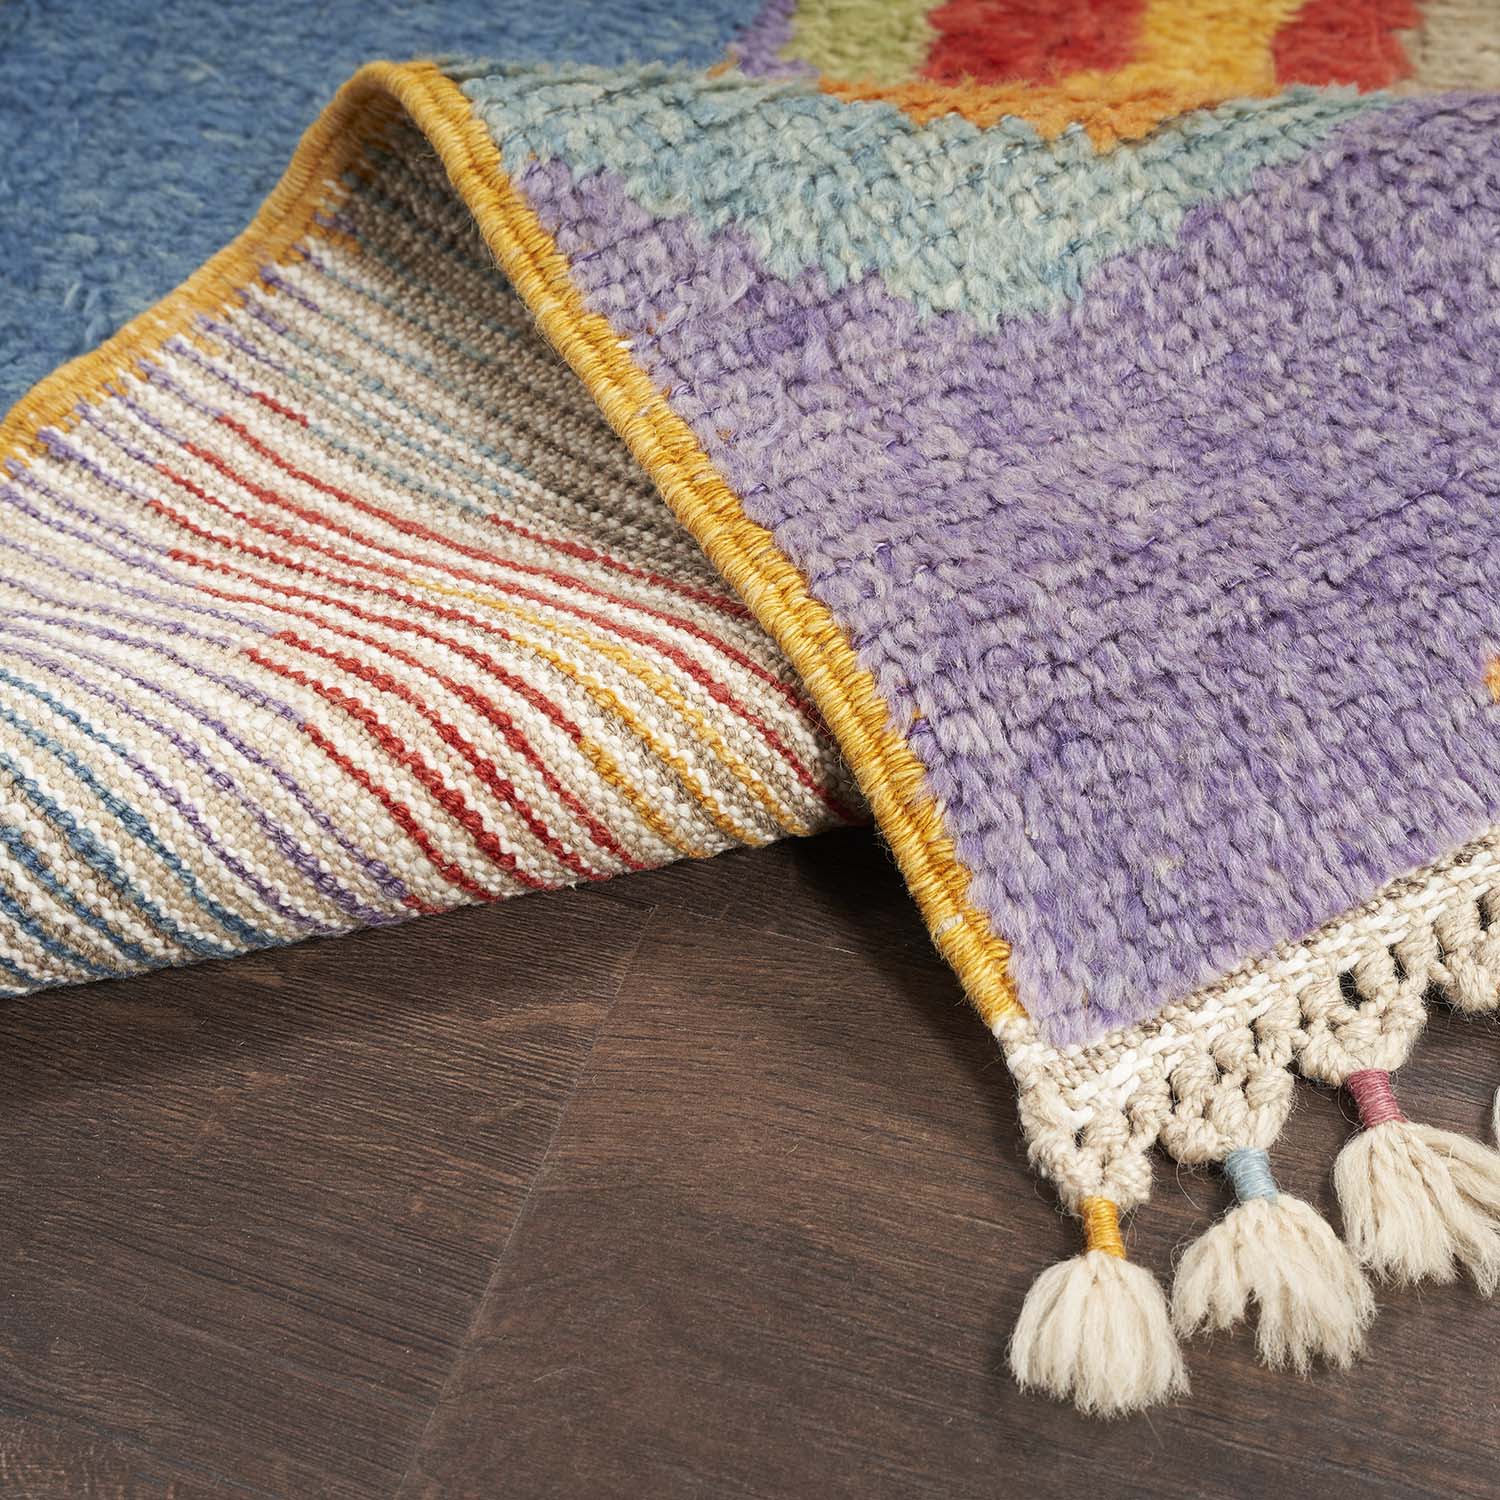 Close-up of vibrant, partially folded rug reveals colorful patterns and fringed tassels.